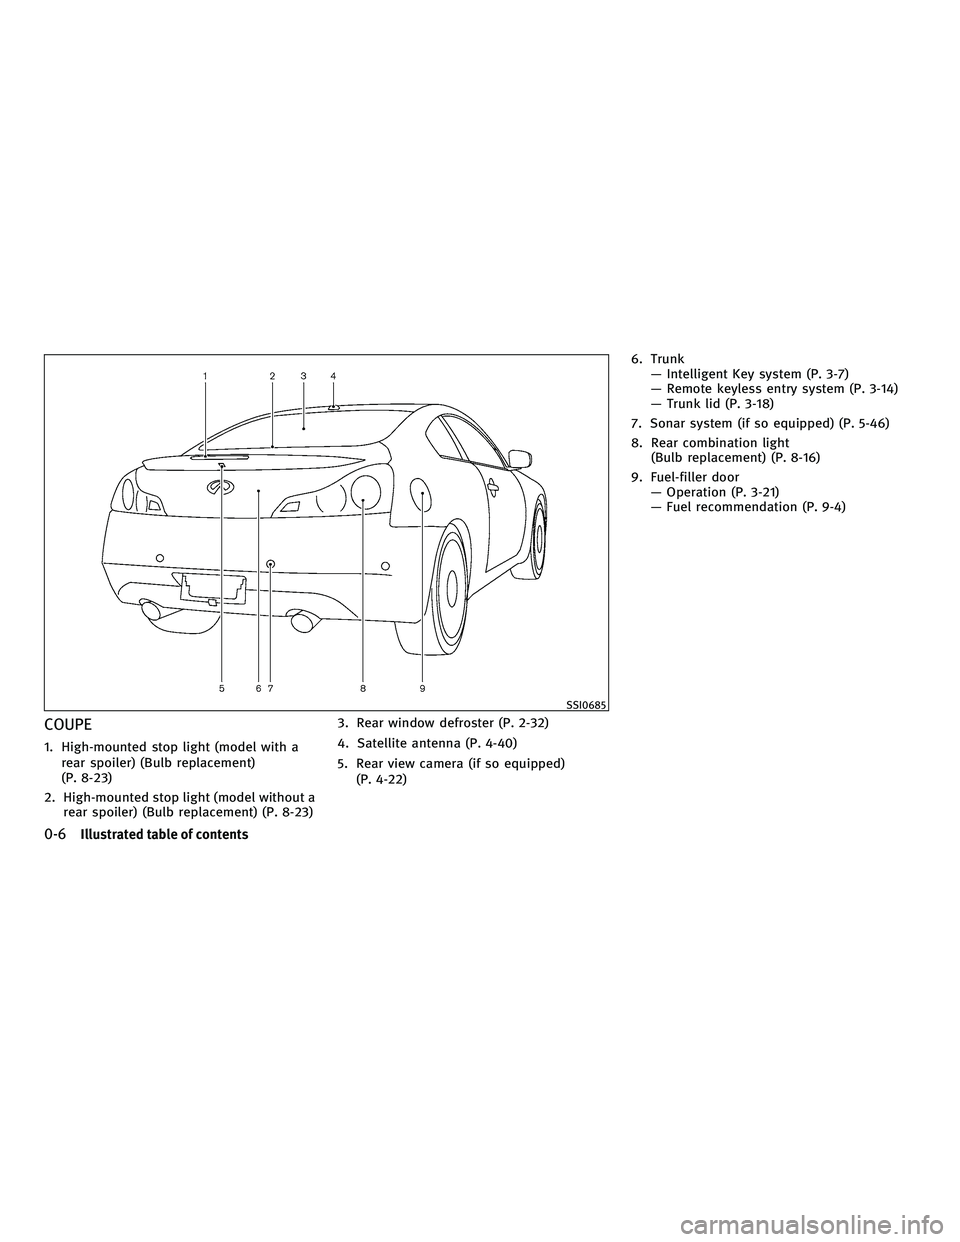 INFINITI G 2010 User Guide COUPE
1. High-mounted stop light (model with arear spoiler) (Bulb replacement)
(P. 8-23)
2. High-mounted stop light (model without a rear spoiler) (Bulb replacement) (P. 8-23) 3. Rear window defroster